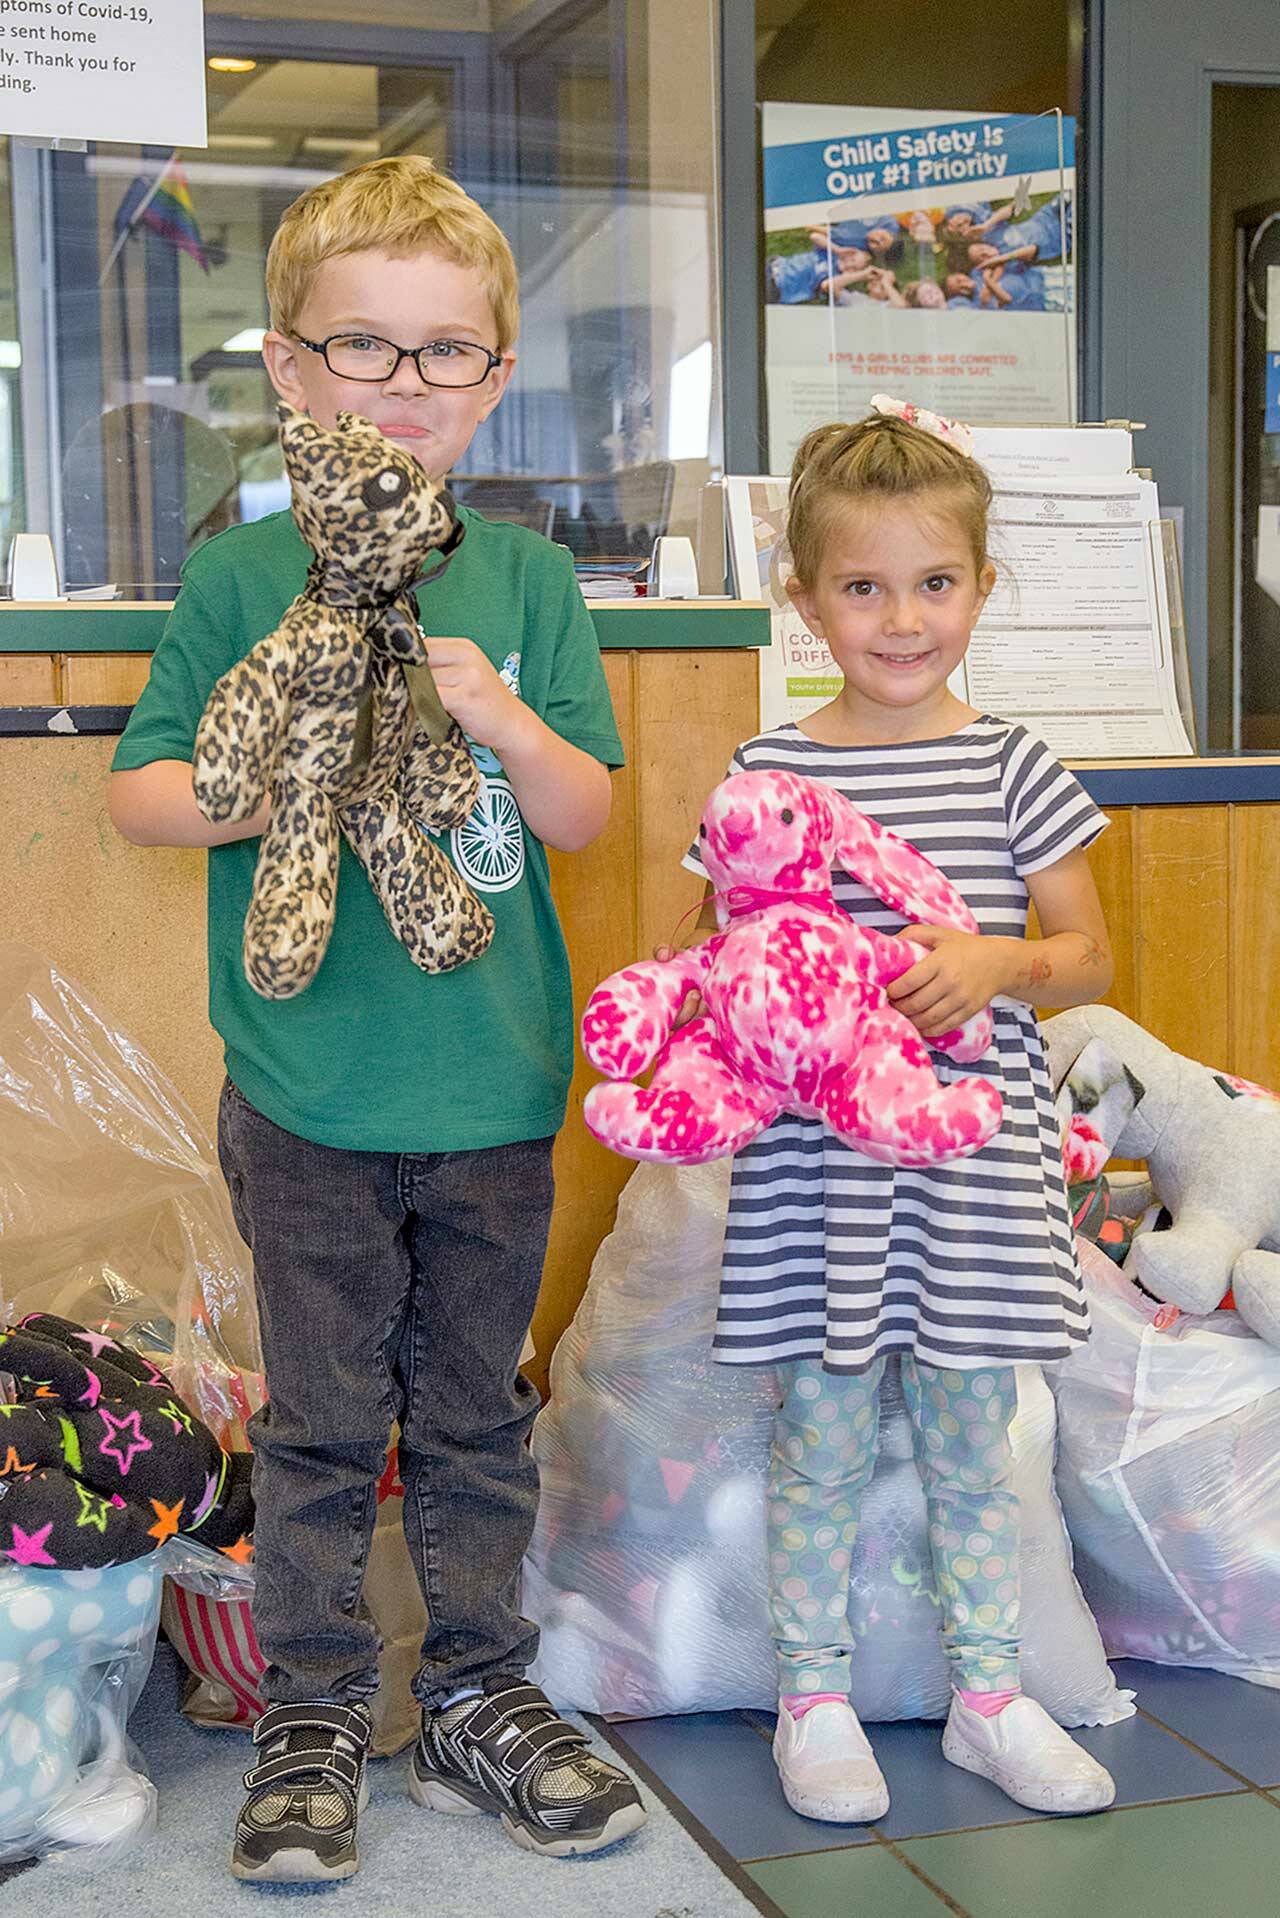 Nick, 5, and Josie, 4, of Great Futures Preschool, housed at the Sequim unit of the Boys & Girls Clubs of the Olympic Peninsula, hold stuffed animals sewn by members of the Sequim Fiber Arts Neighborhood Group of the American Sewing Guild for distribution at the club. (Emily Matthiessen/Olympic Peninsula News Group)